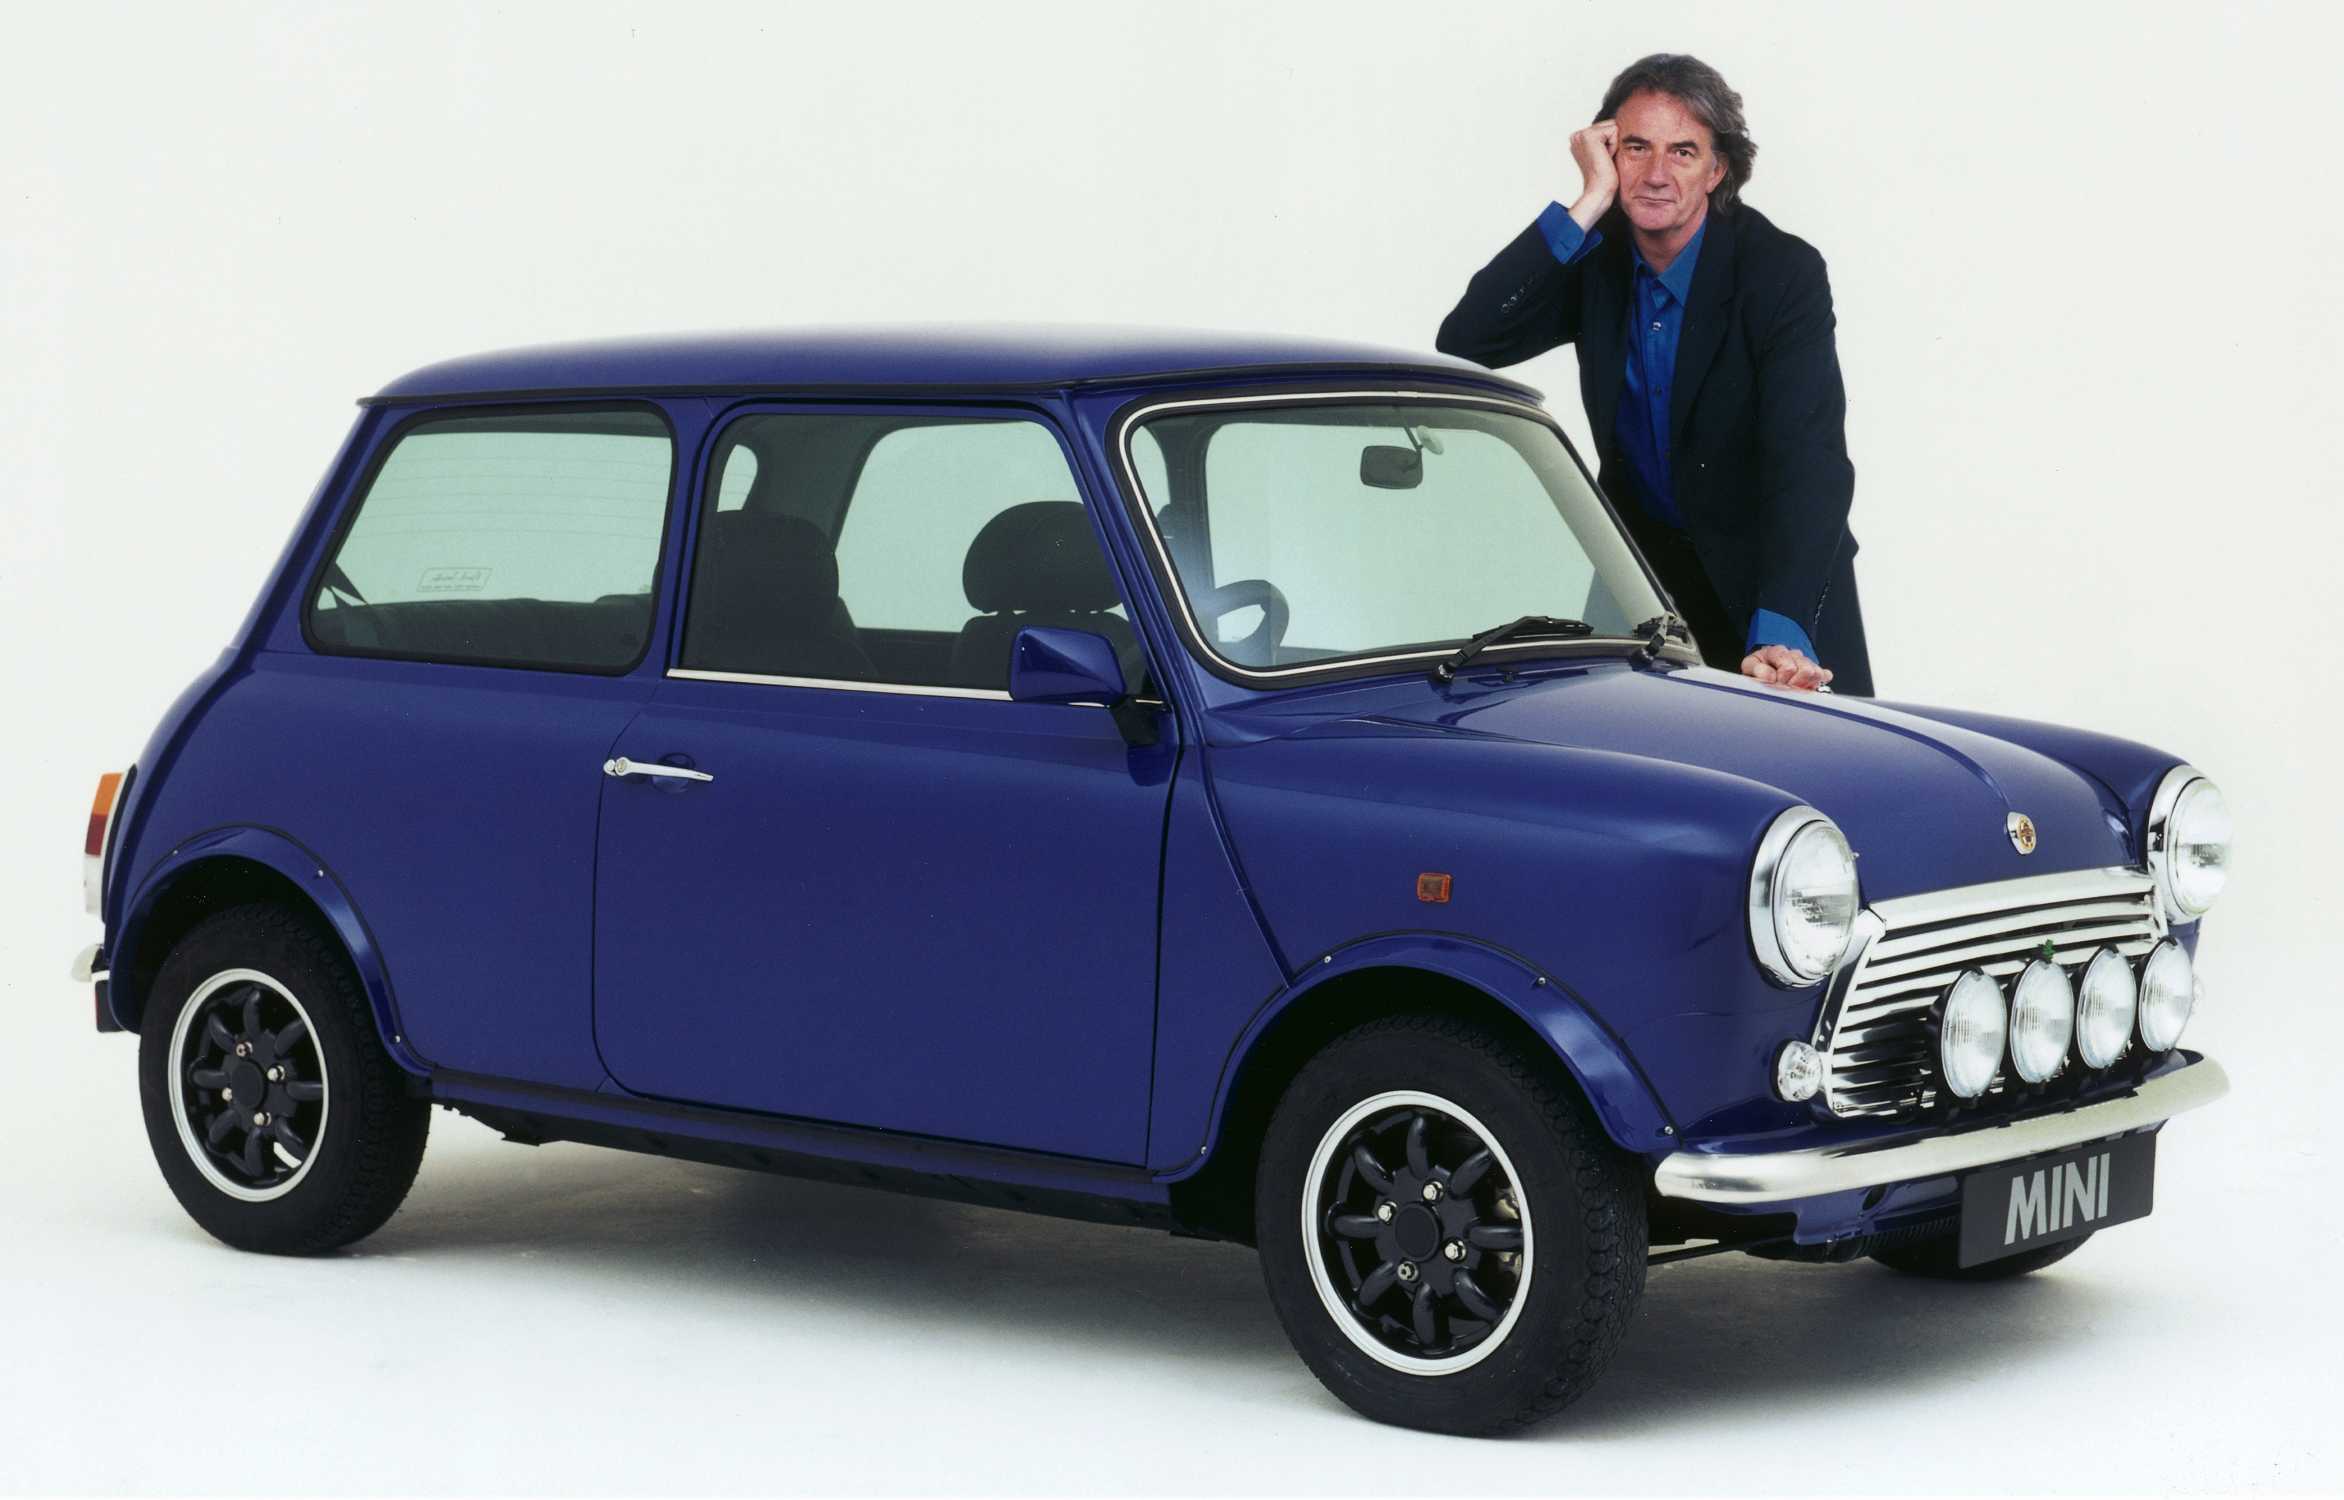 Mini Paul Smith Edition. The typical Paul Smith Blue, the